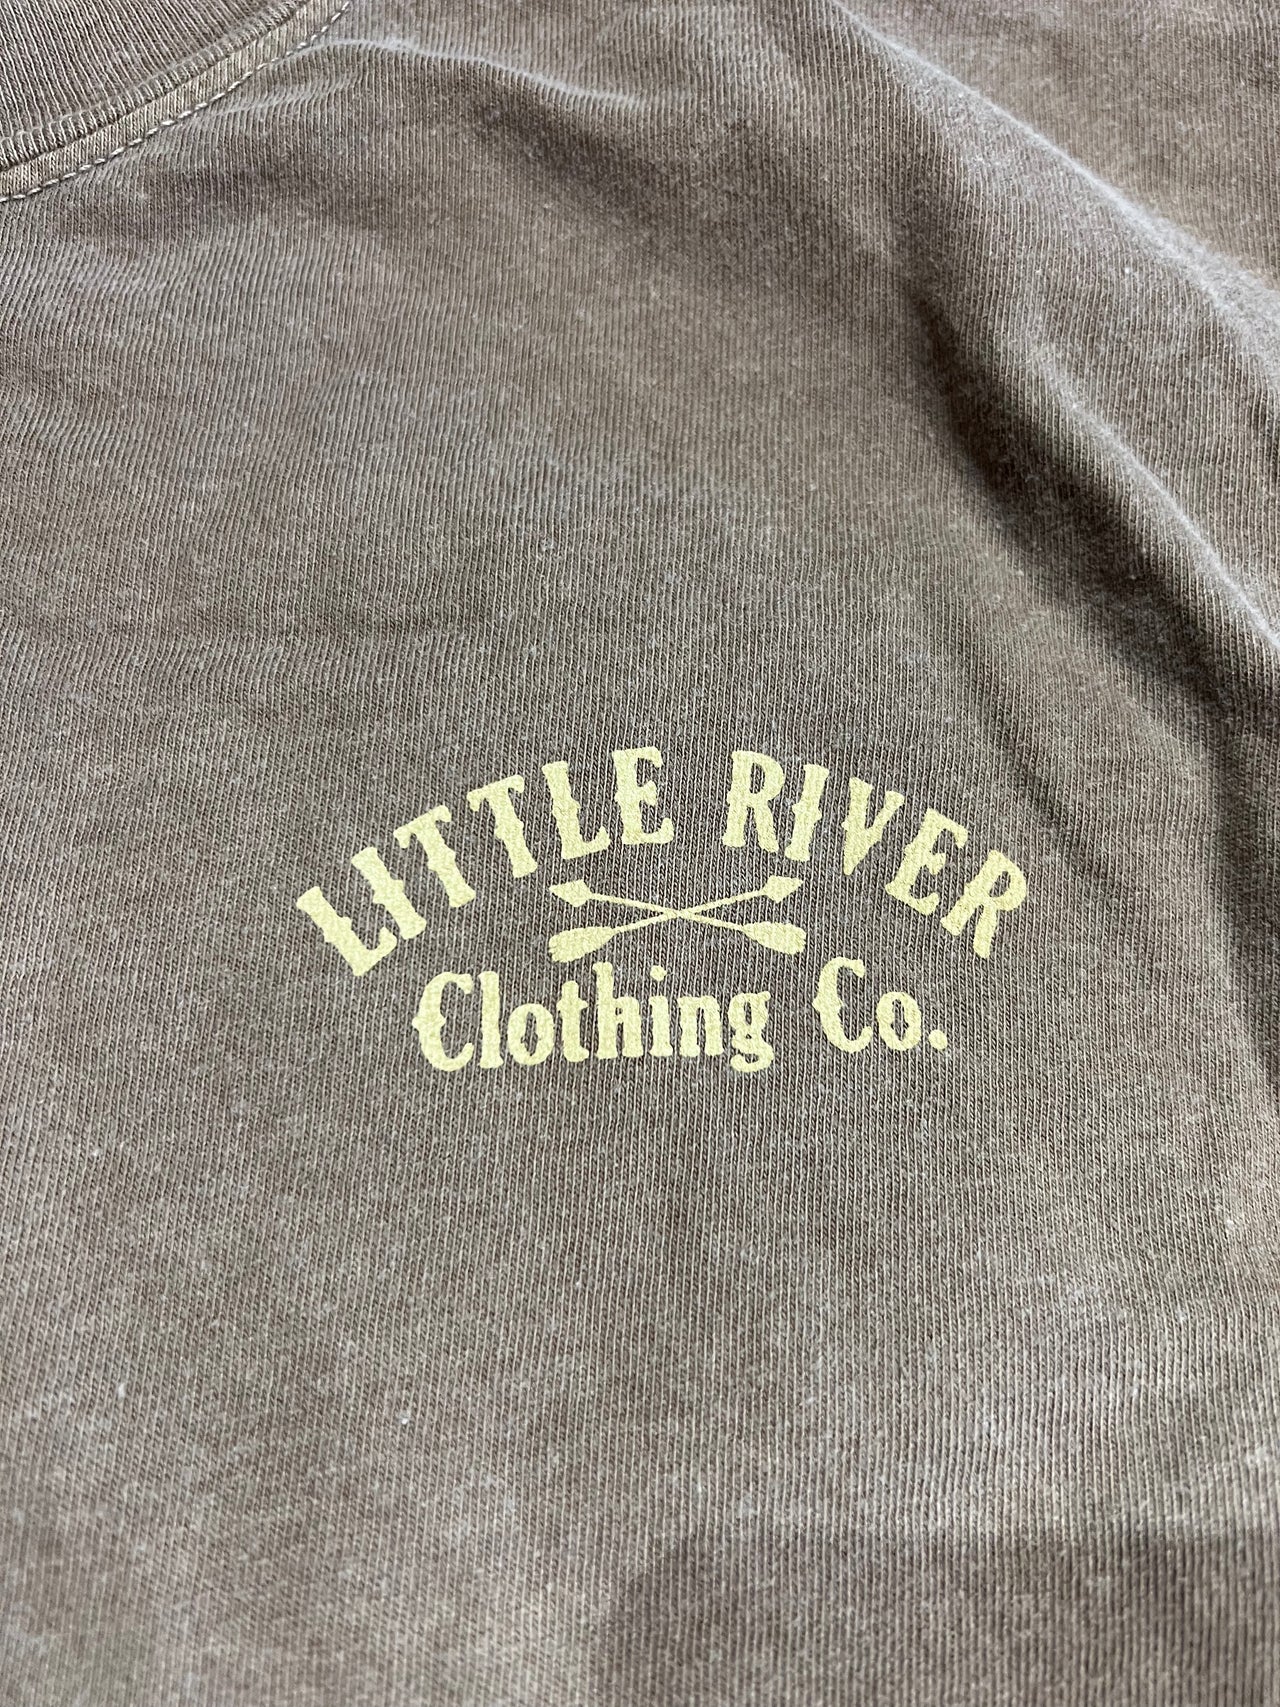 Little River Wings SS Tee - Brown